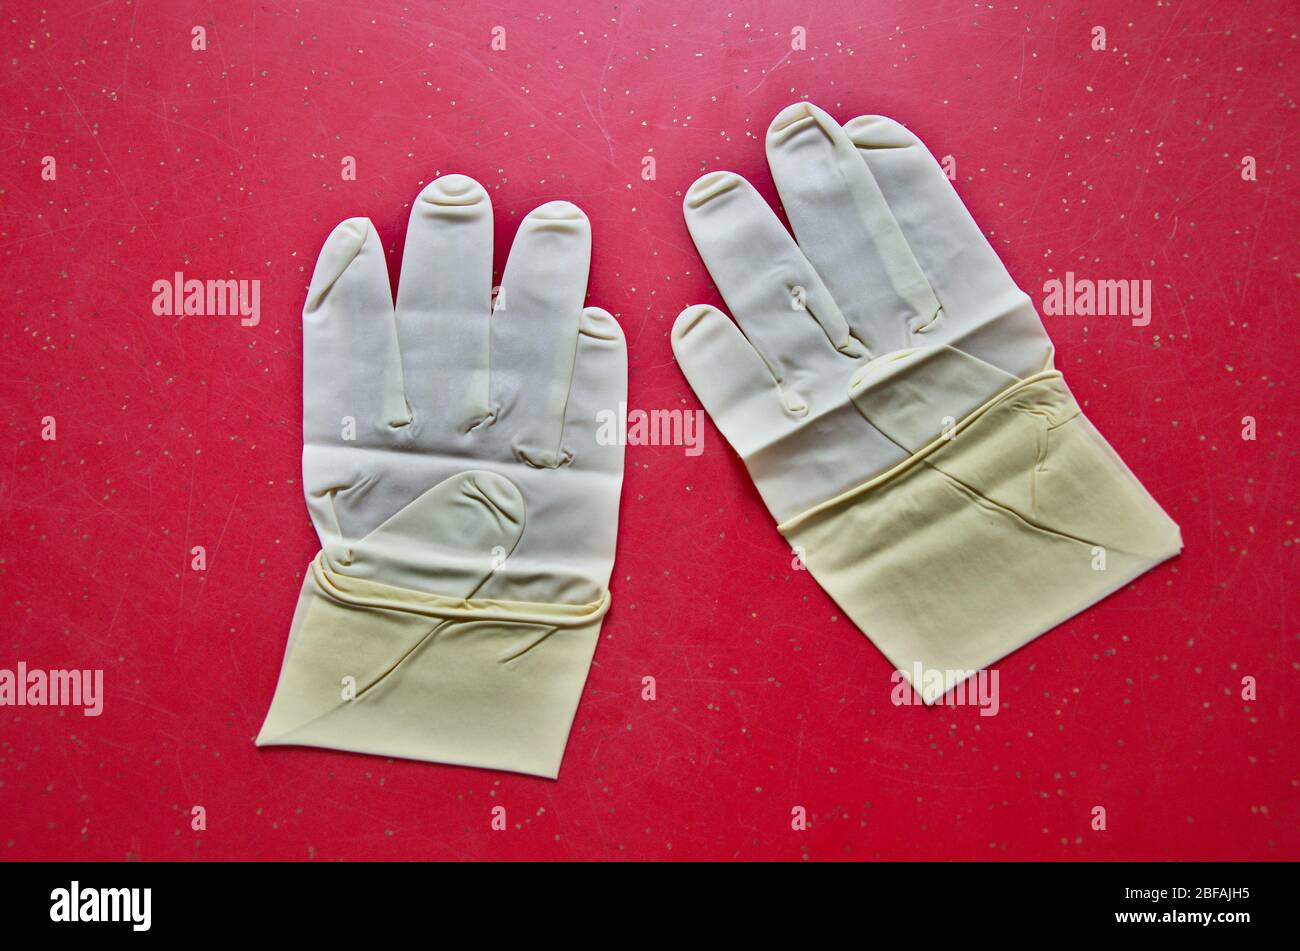 Latex medical examination gloves. PPE Personal Protective Equipment. Stock Photo